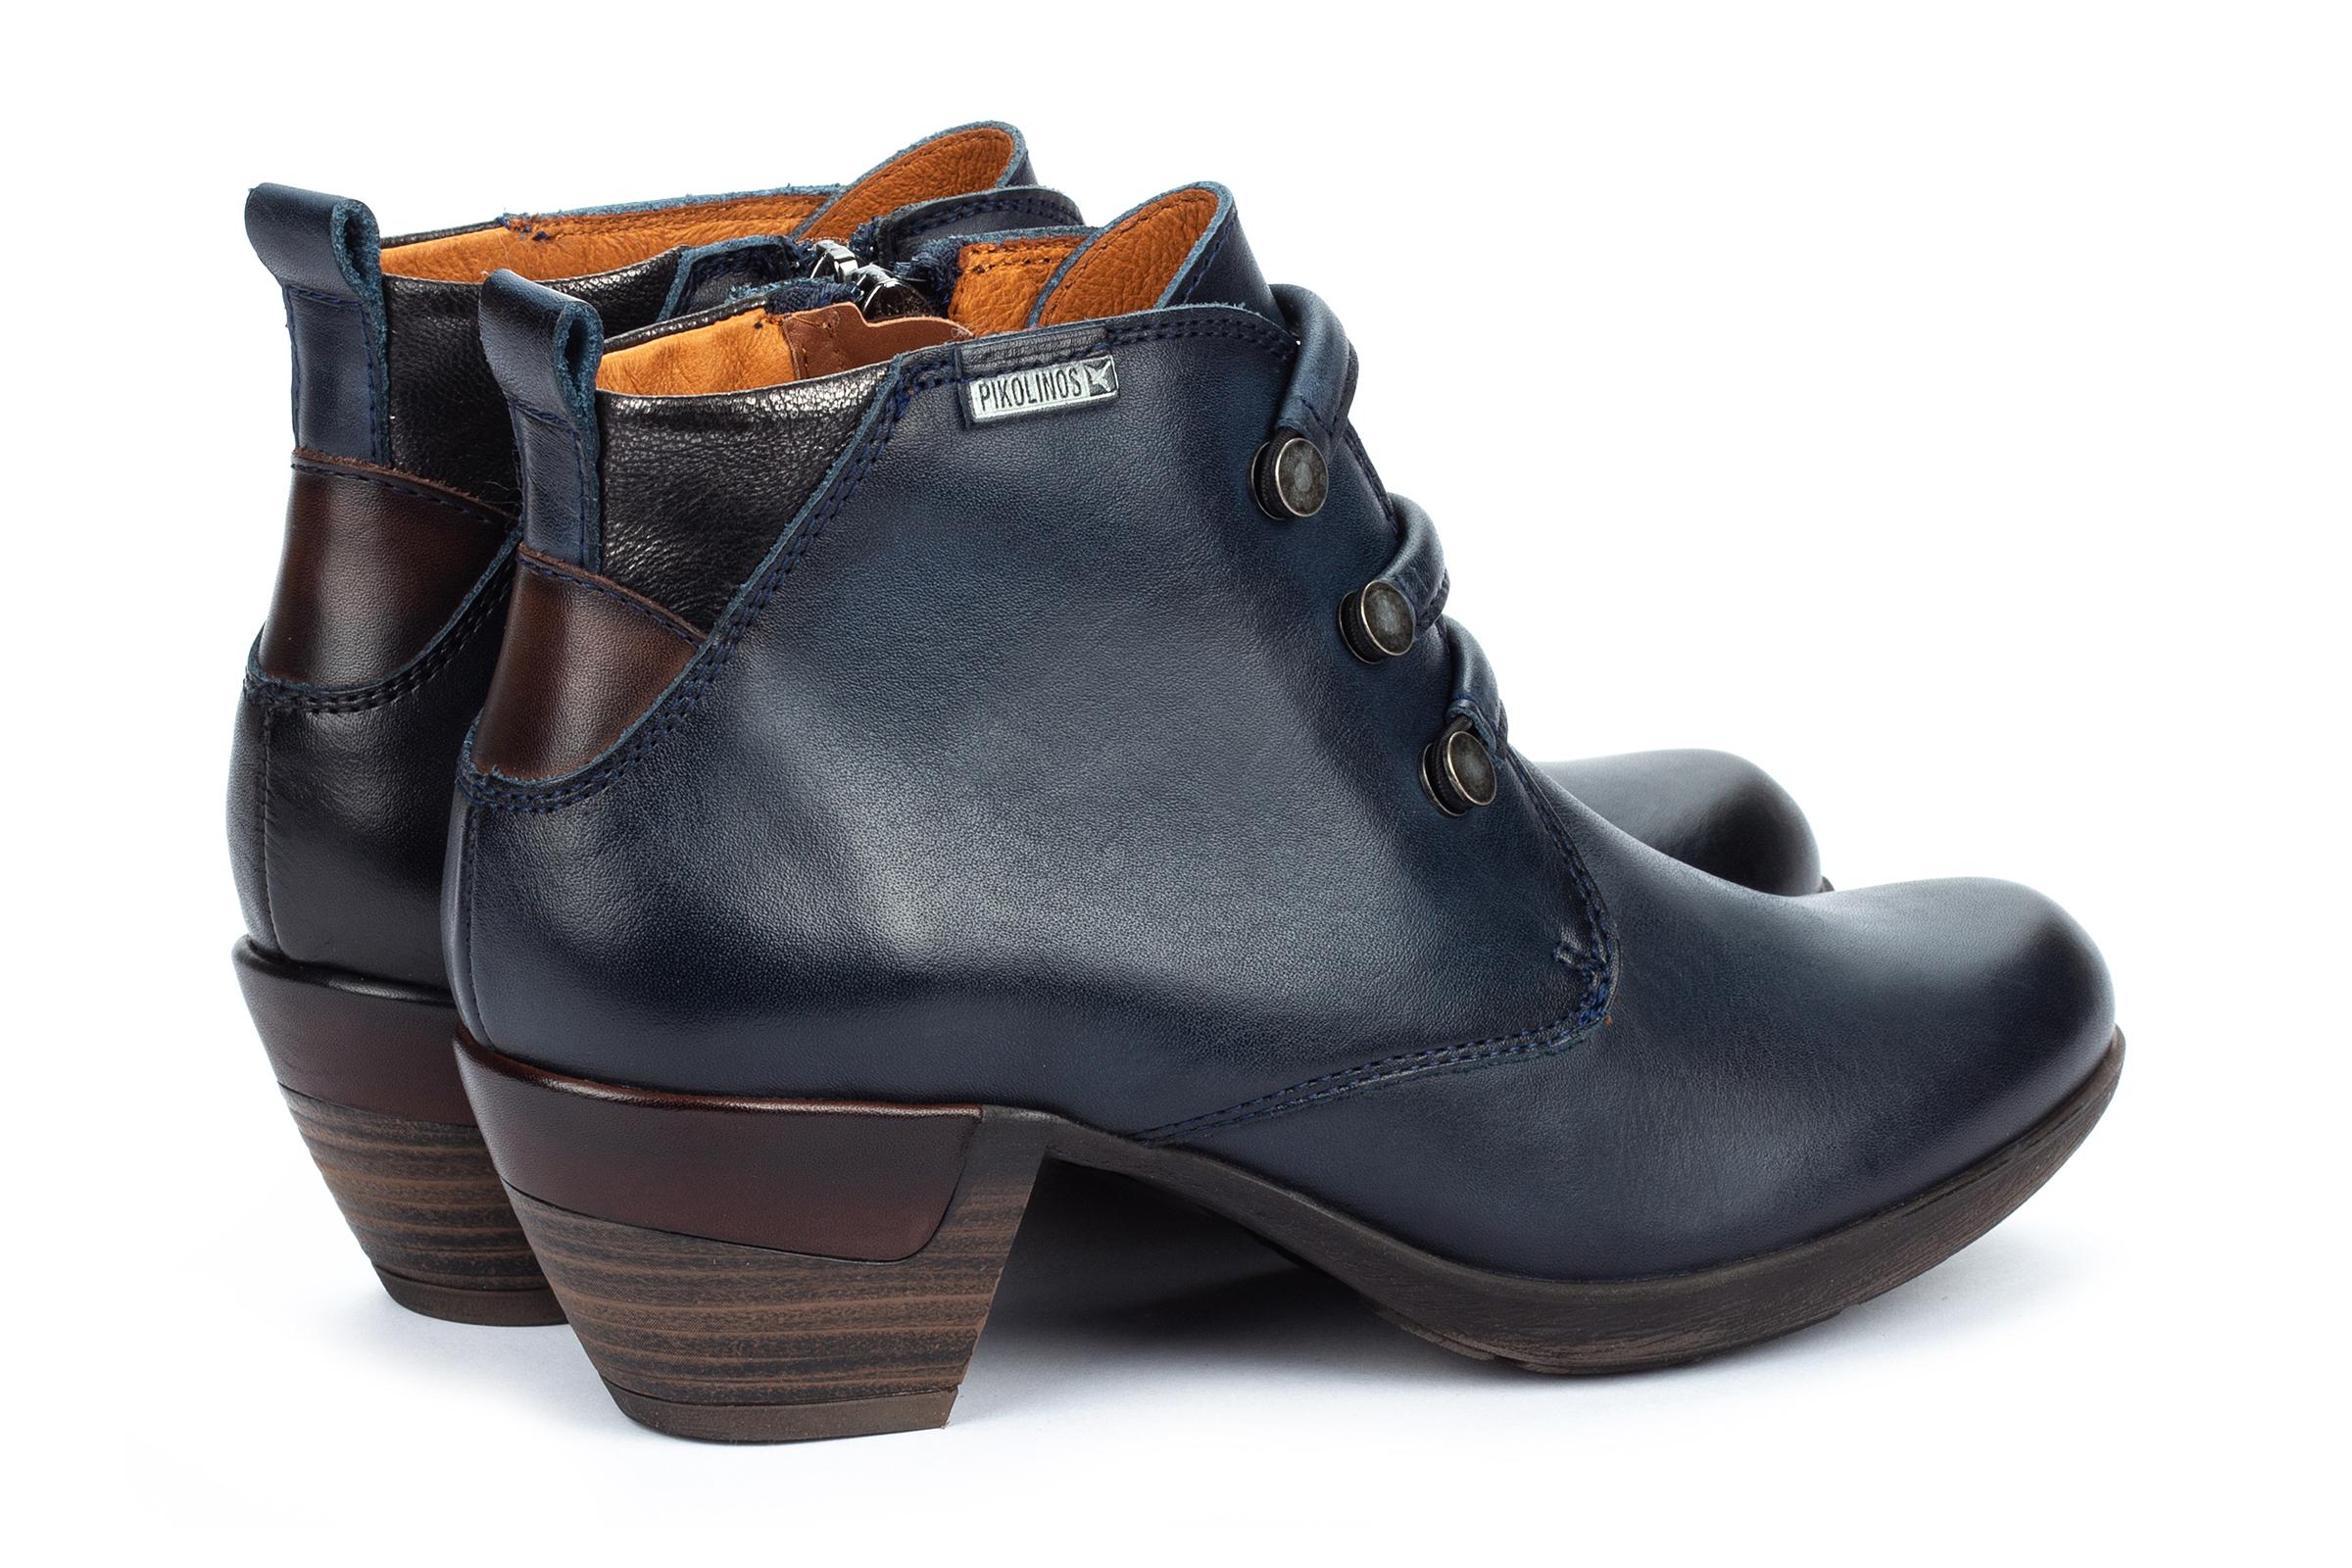 Pikolinos Rotterdam Ankle Boot 902-8746 in Blue Leather (Blue) - Save ...